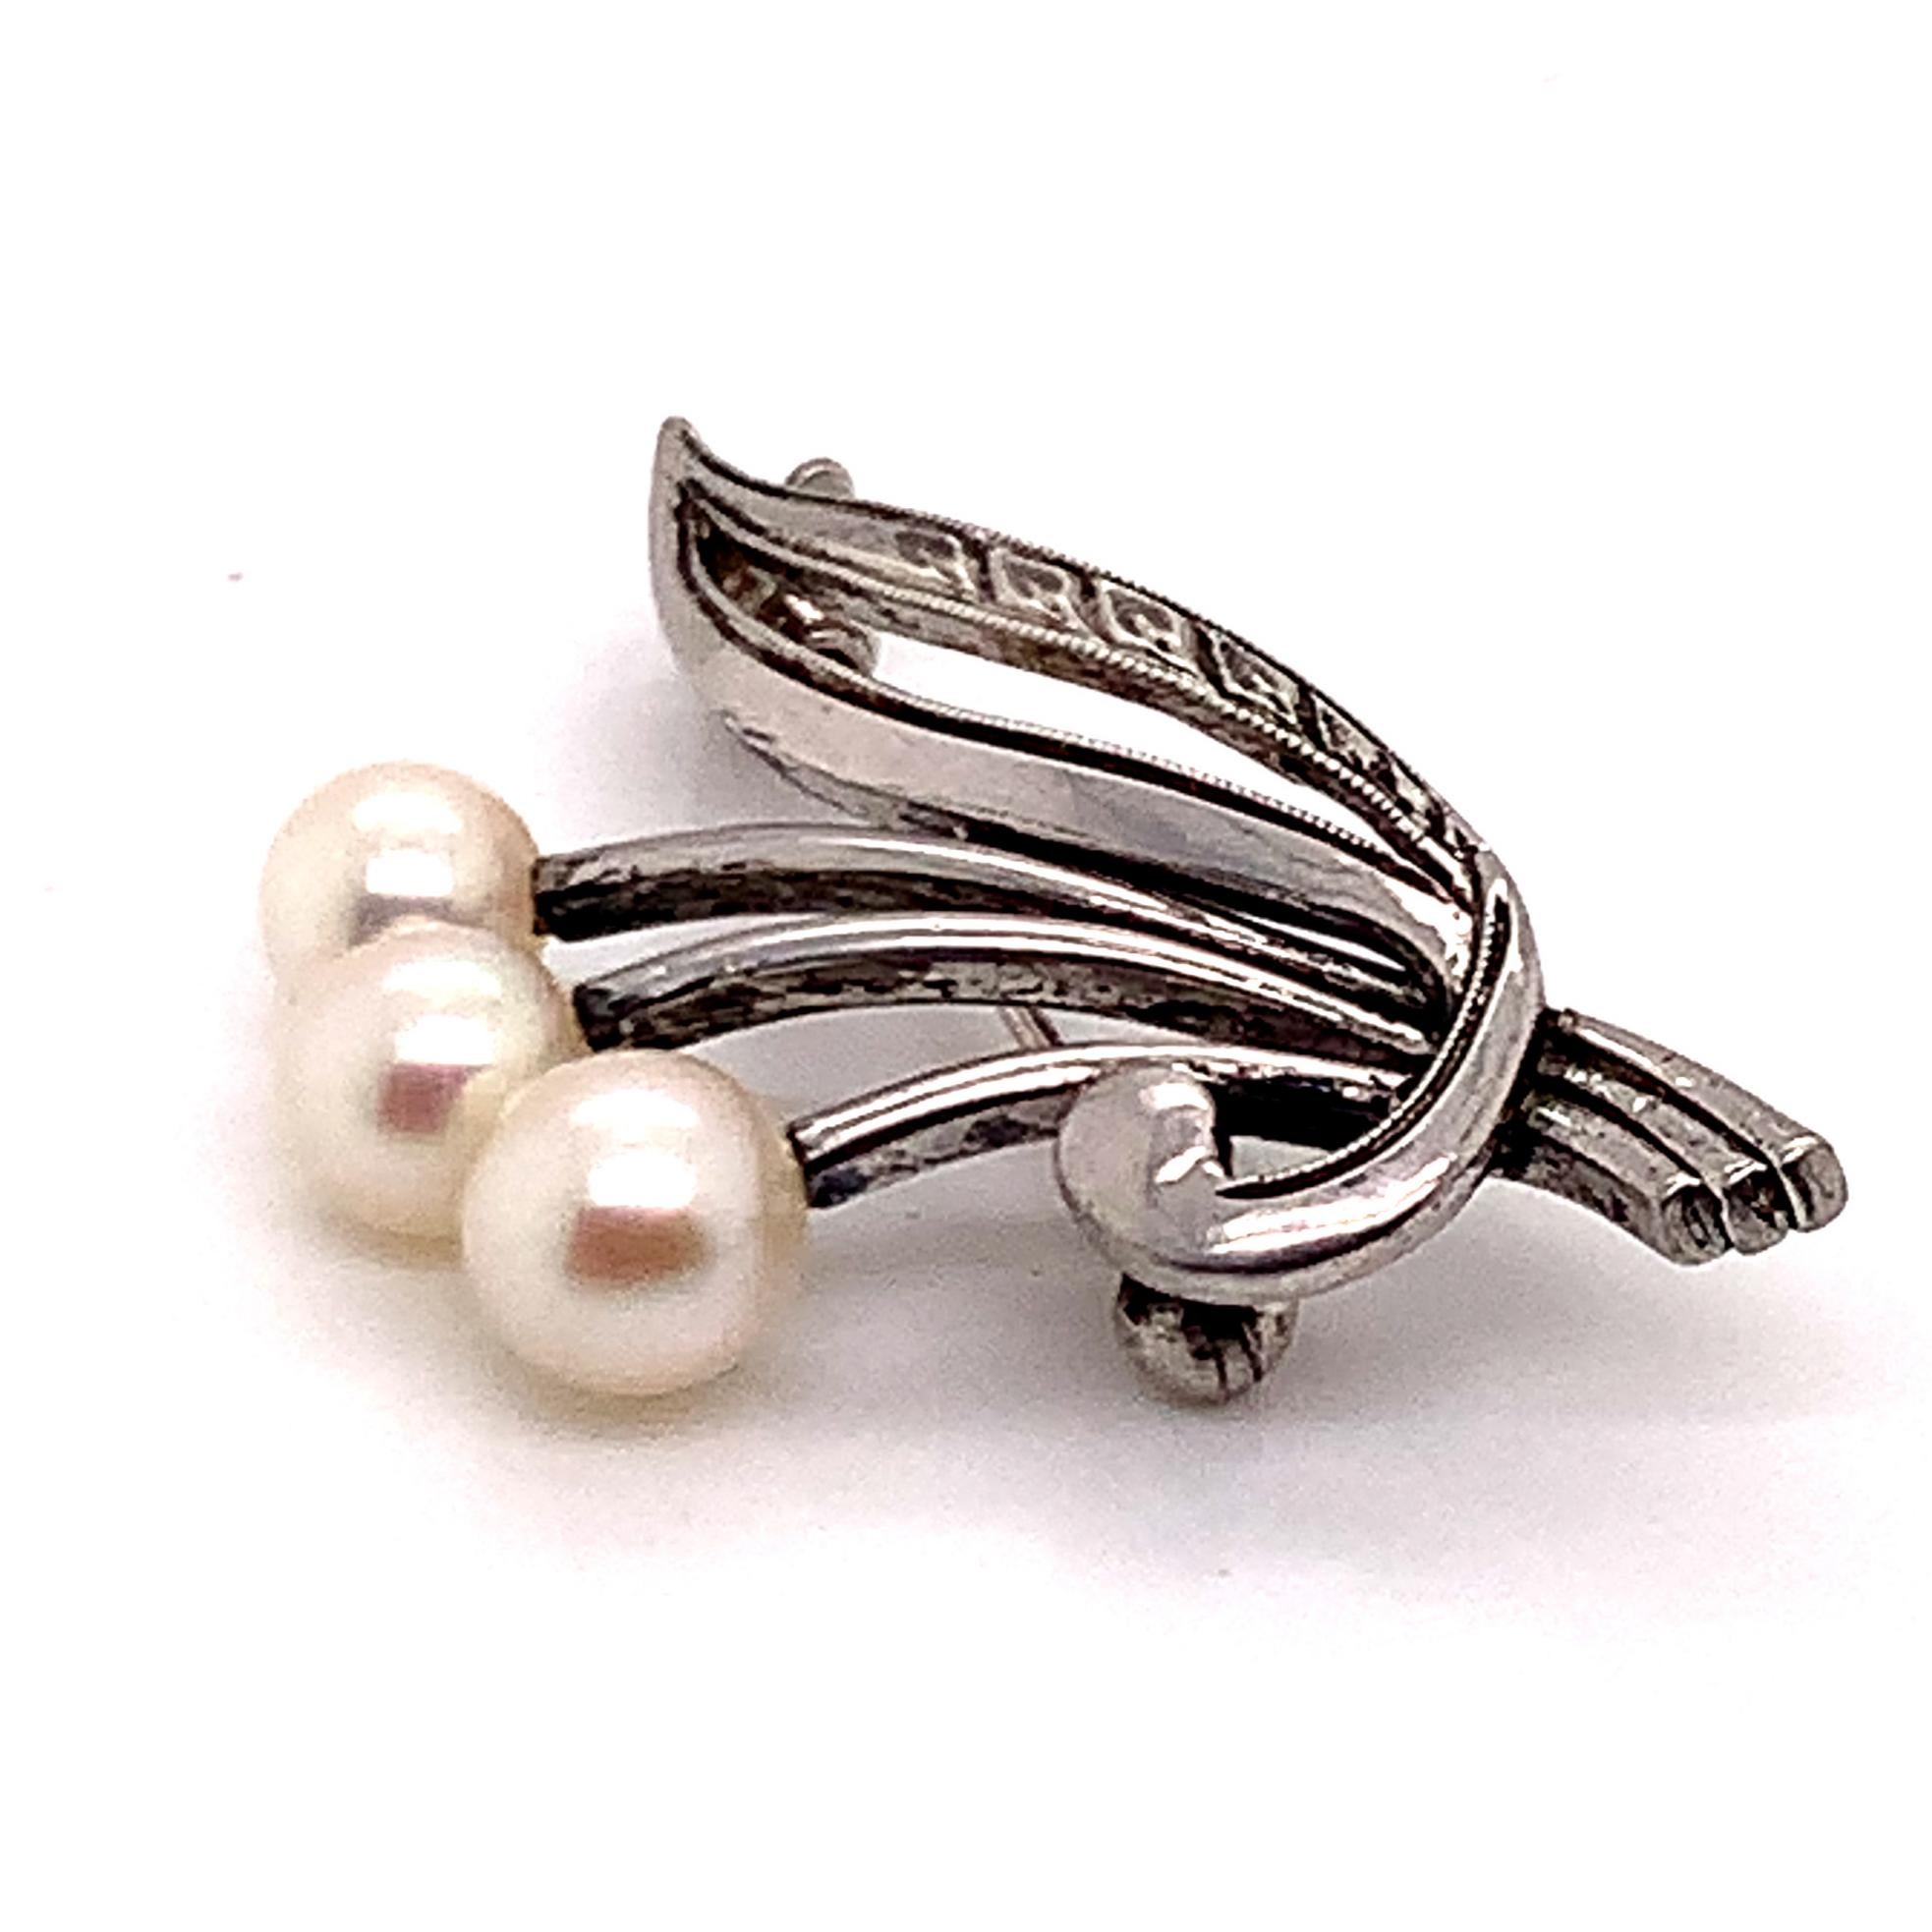 Mikimoto Estate Akoya Pearl Brooch Pin Sterling Silver For Sale 3